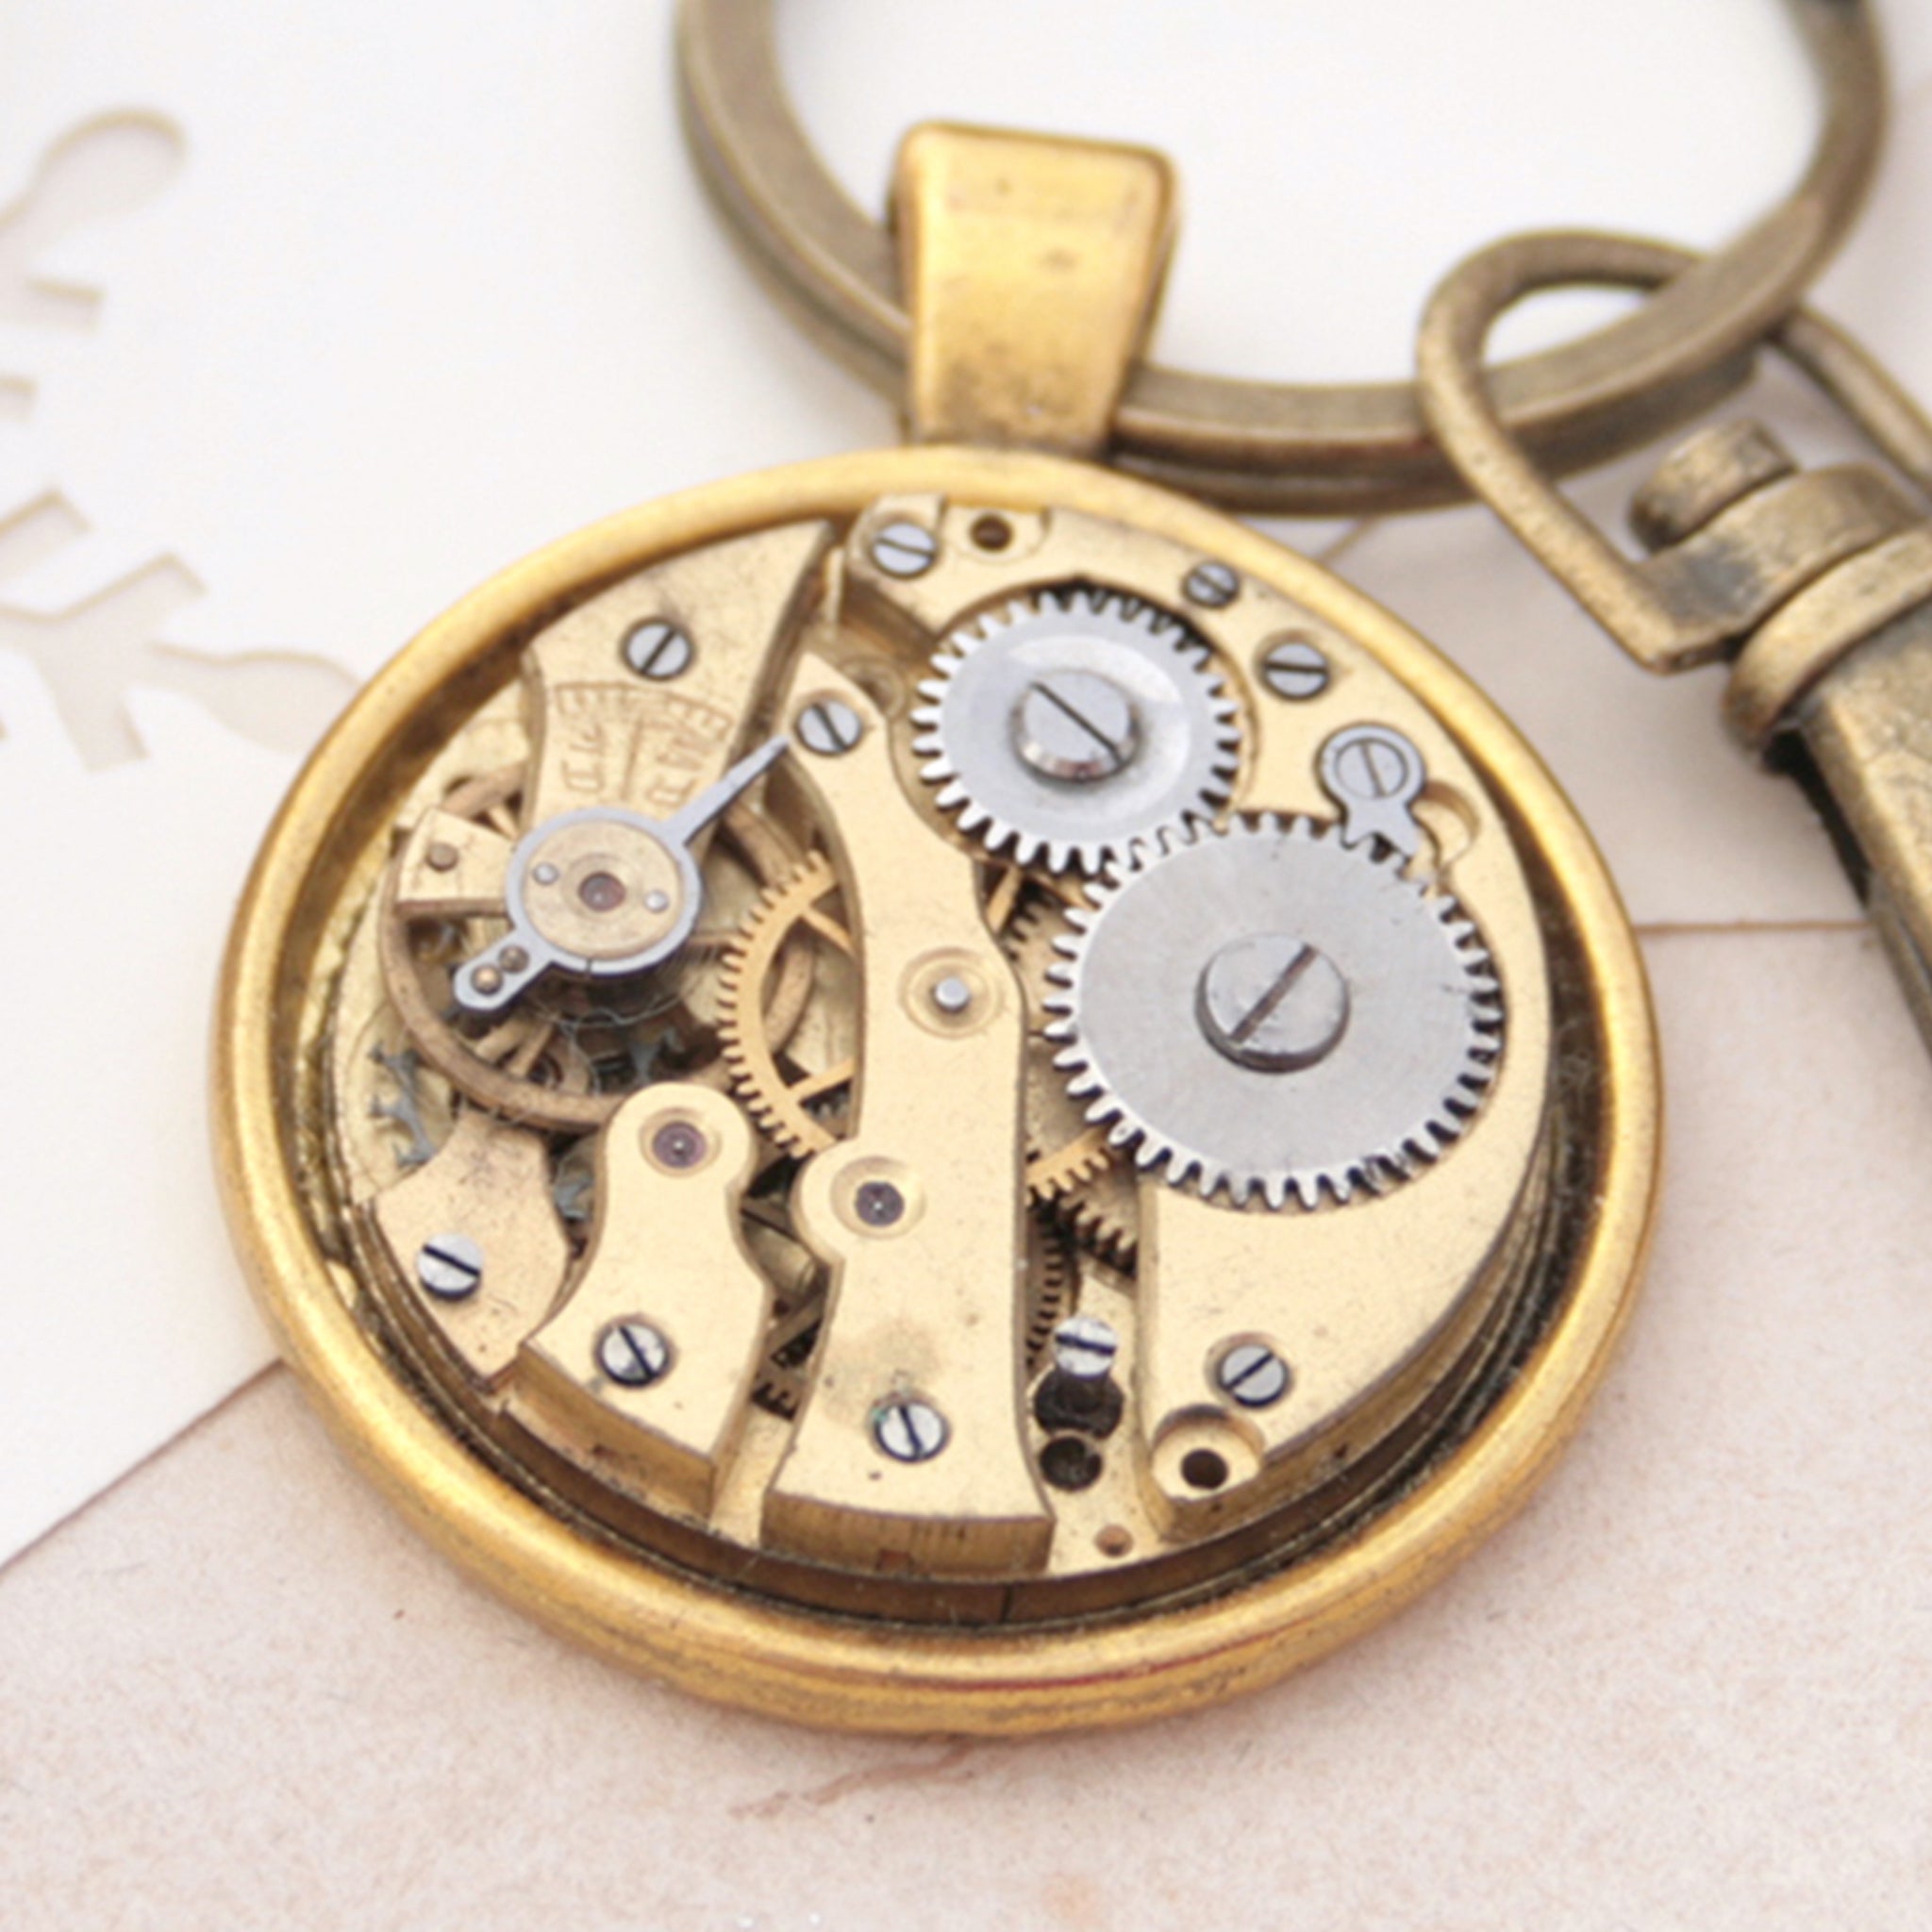 Keyrings for Car Keys made of gold tone watch movement